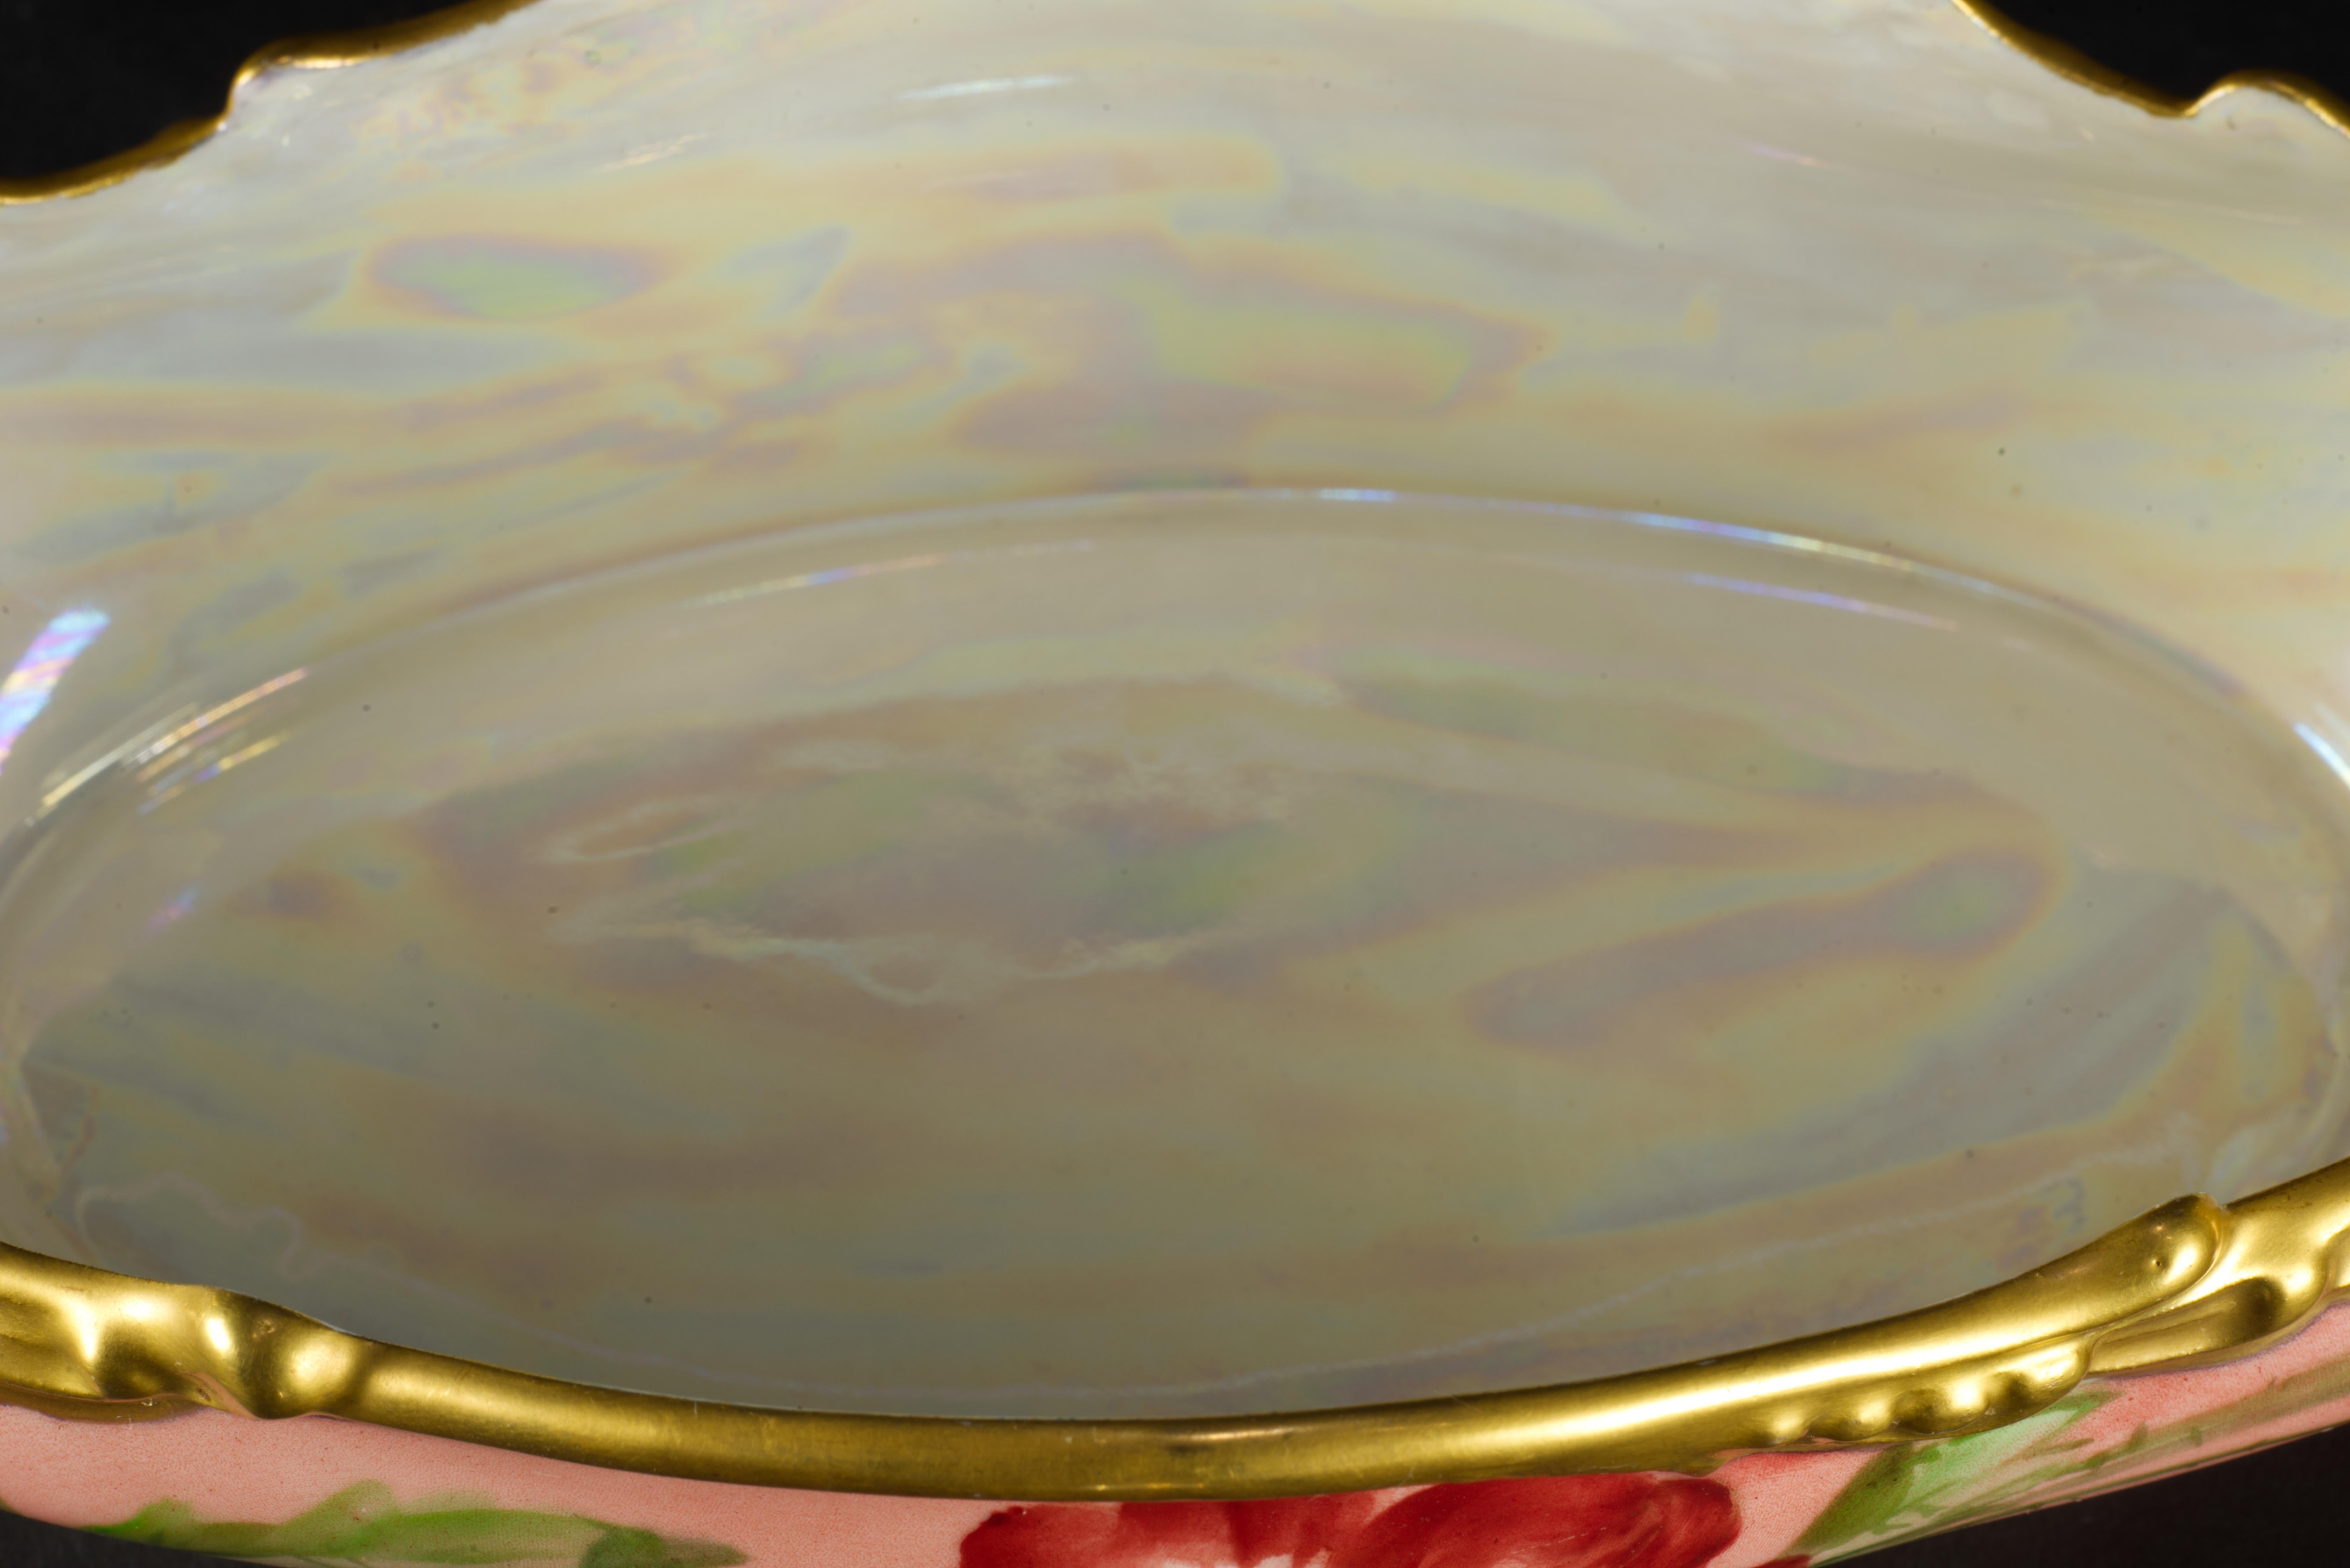 20th Century Rare Jean Pouyat Limoges France Oval Hand-painted Porcelain Ravier Bowl, 1926 For Sale